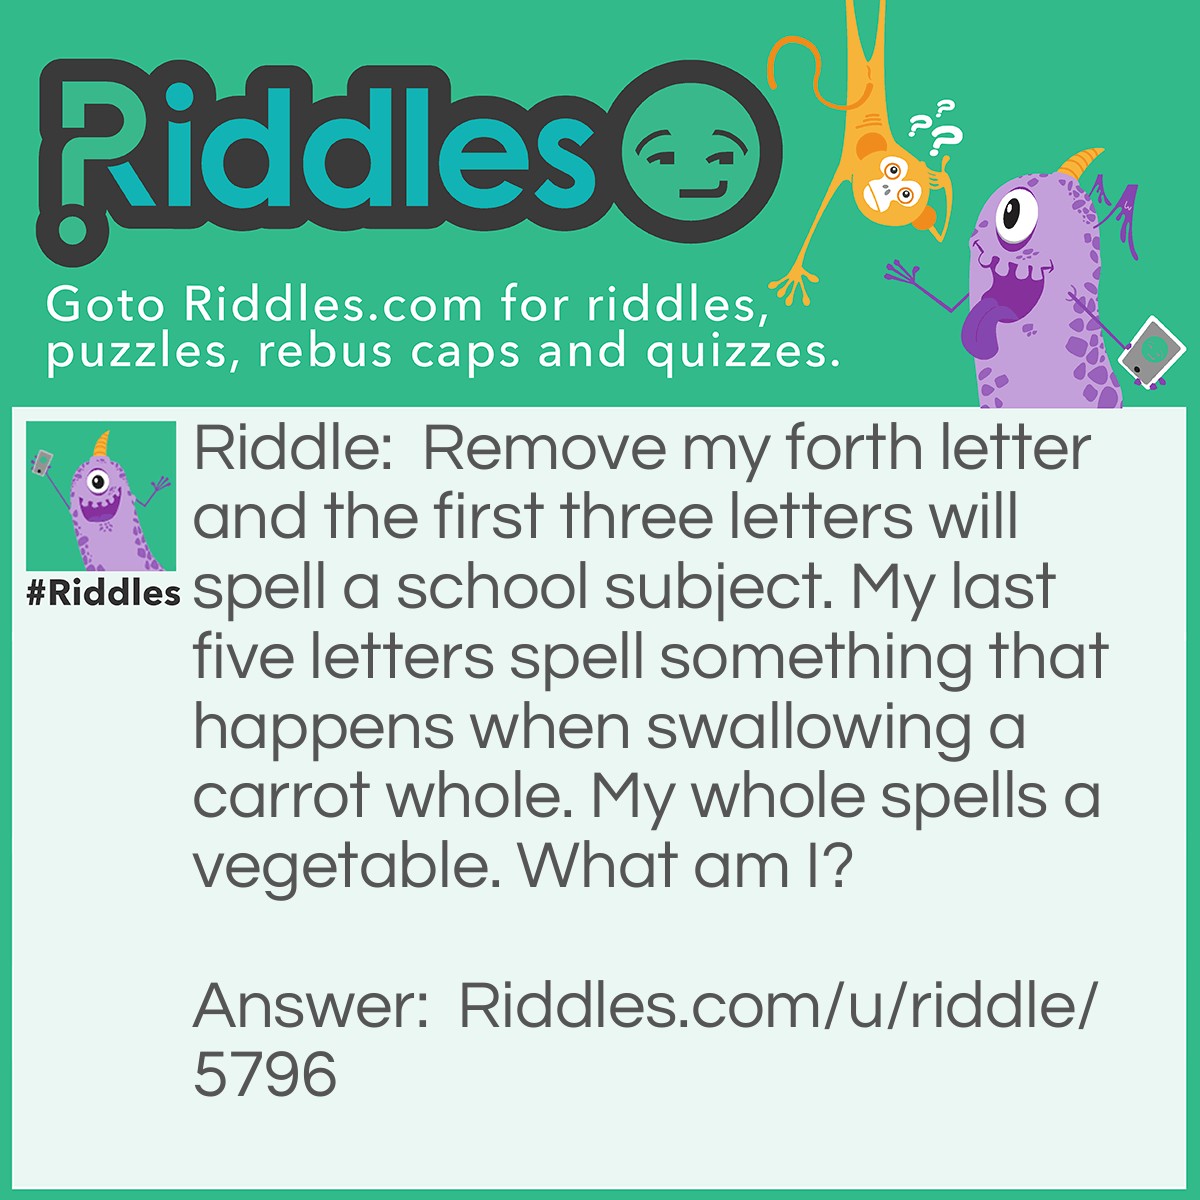 Riddle: Remove my forth letter and the first three letters will spell a school subject. My last five letters spell something that happens when swallowing a carrot whole. My whole spells a vegetable. What am I? Answer: An artichoke.